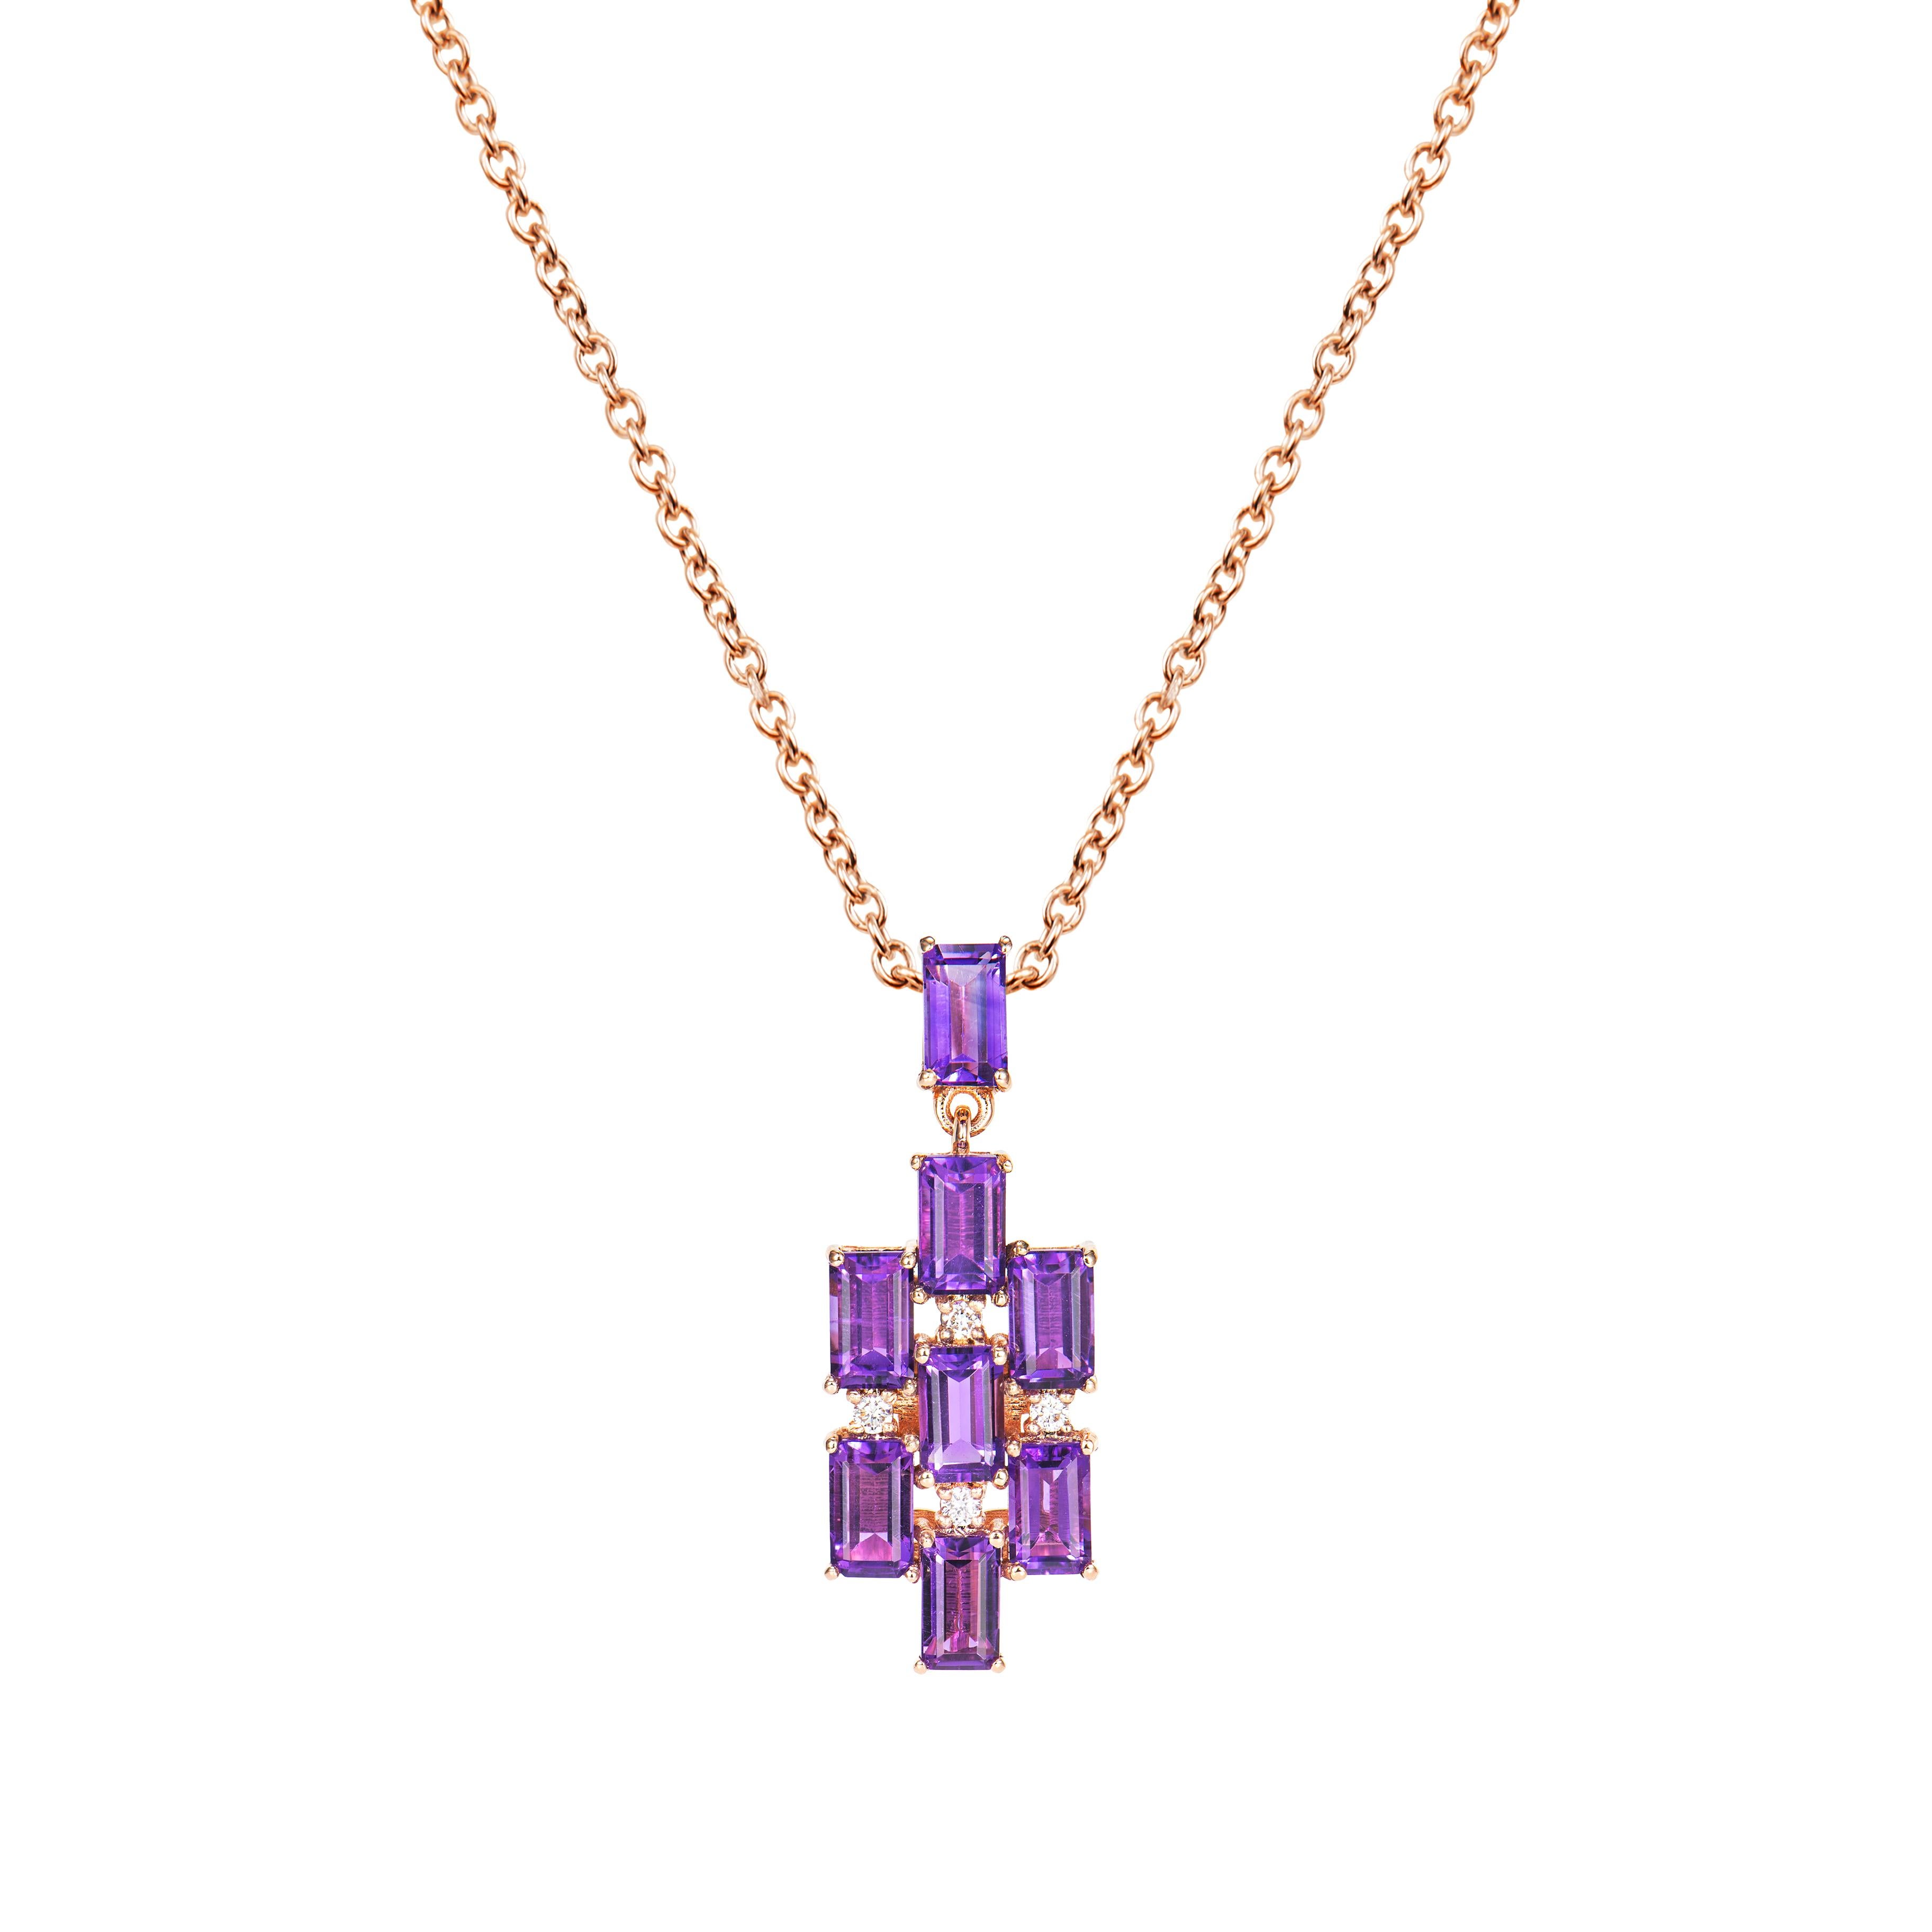 Contemporary 2.70 Carat Amethyst Pendant in 18Karat Rose Gold with White Diamond. For Sale